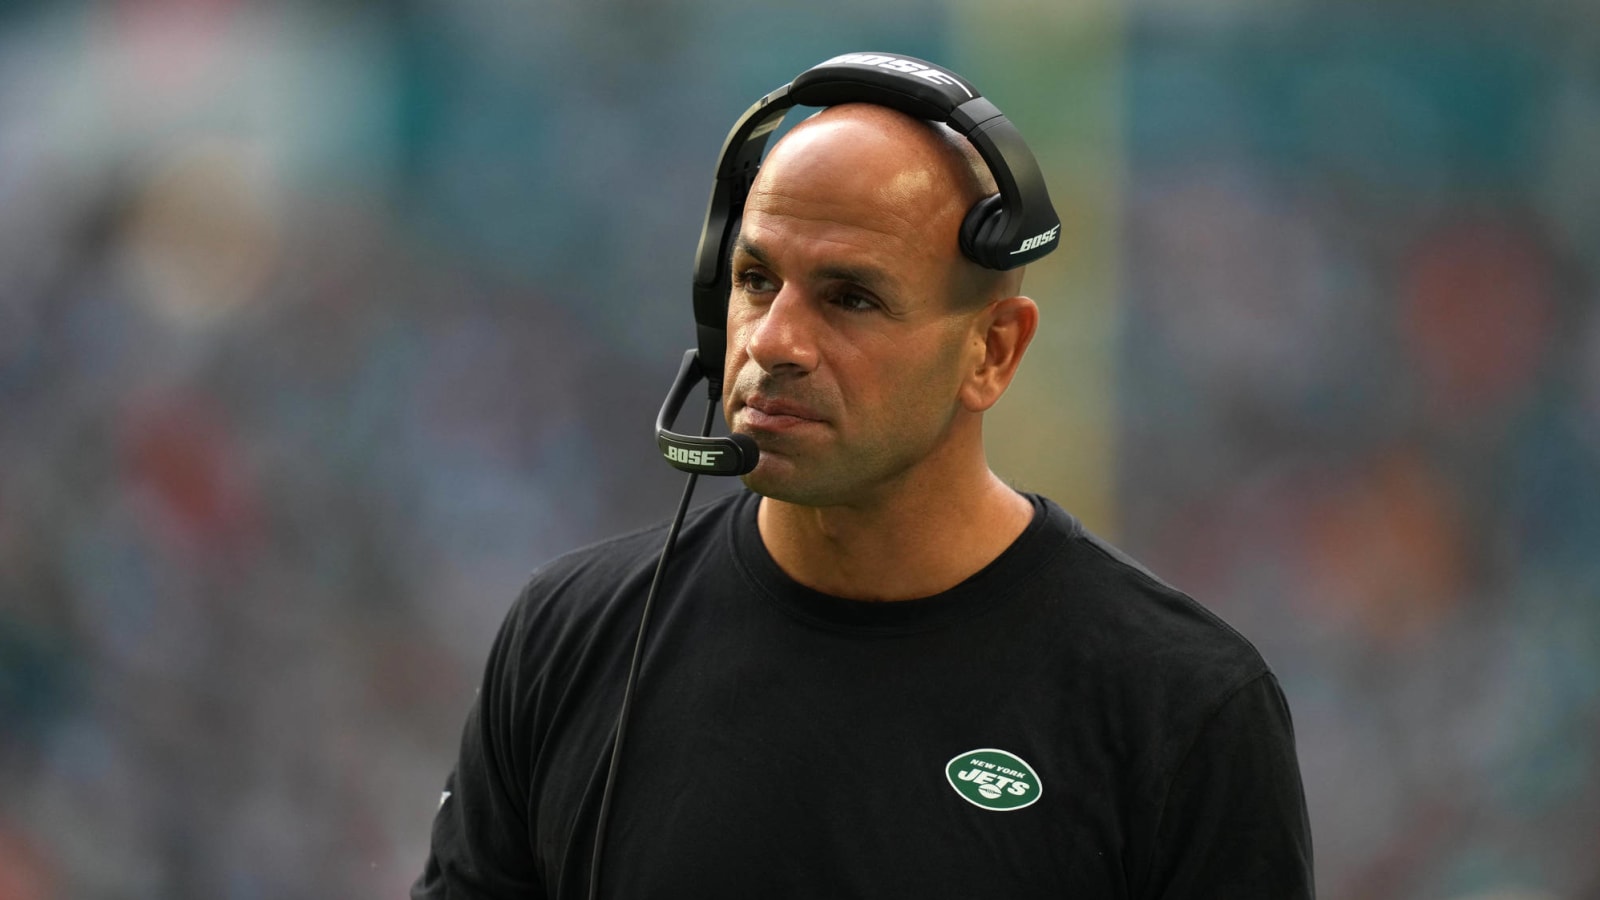 Robert Saleh: I've lost about 25 pounds this season coaching the Jets